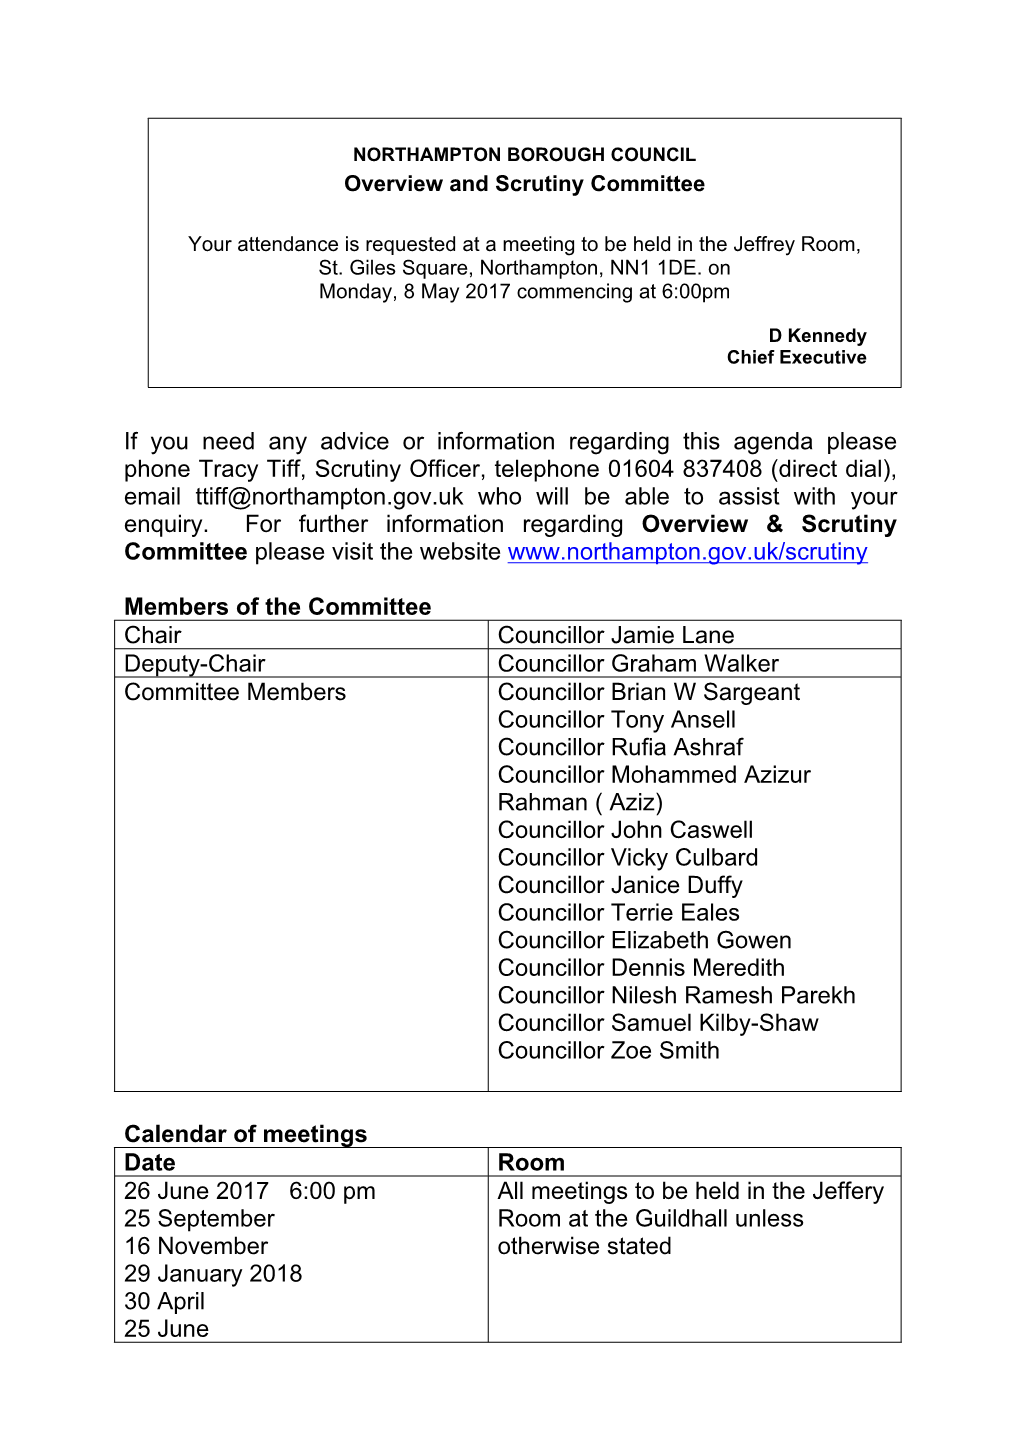 (Public Pack)Agenda Document for Overview & Scrutiny Committee, 08